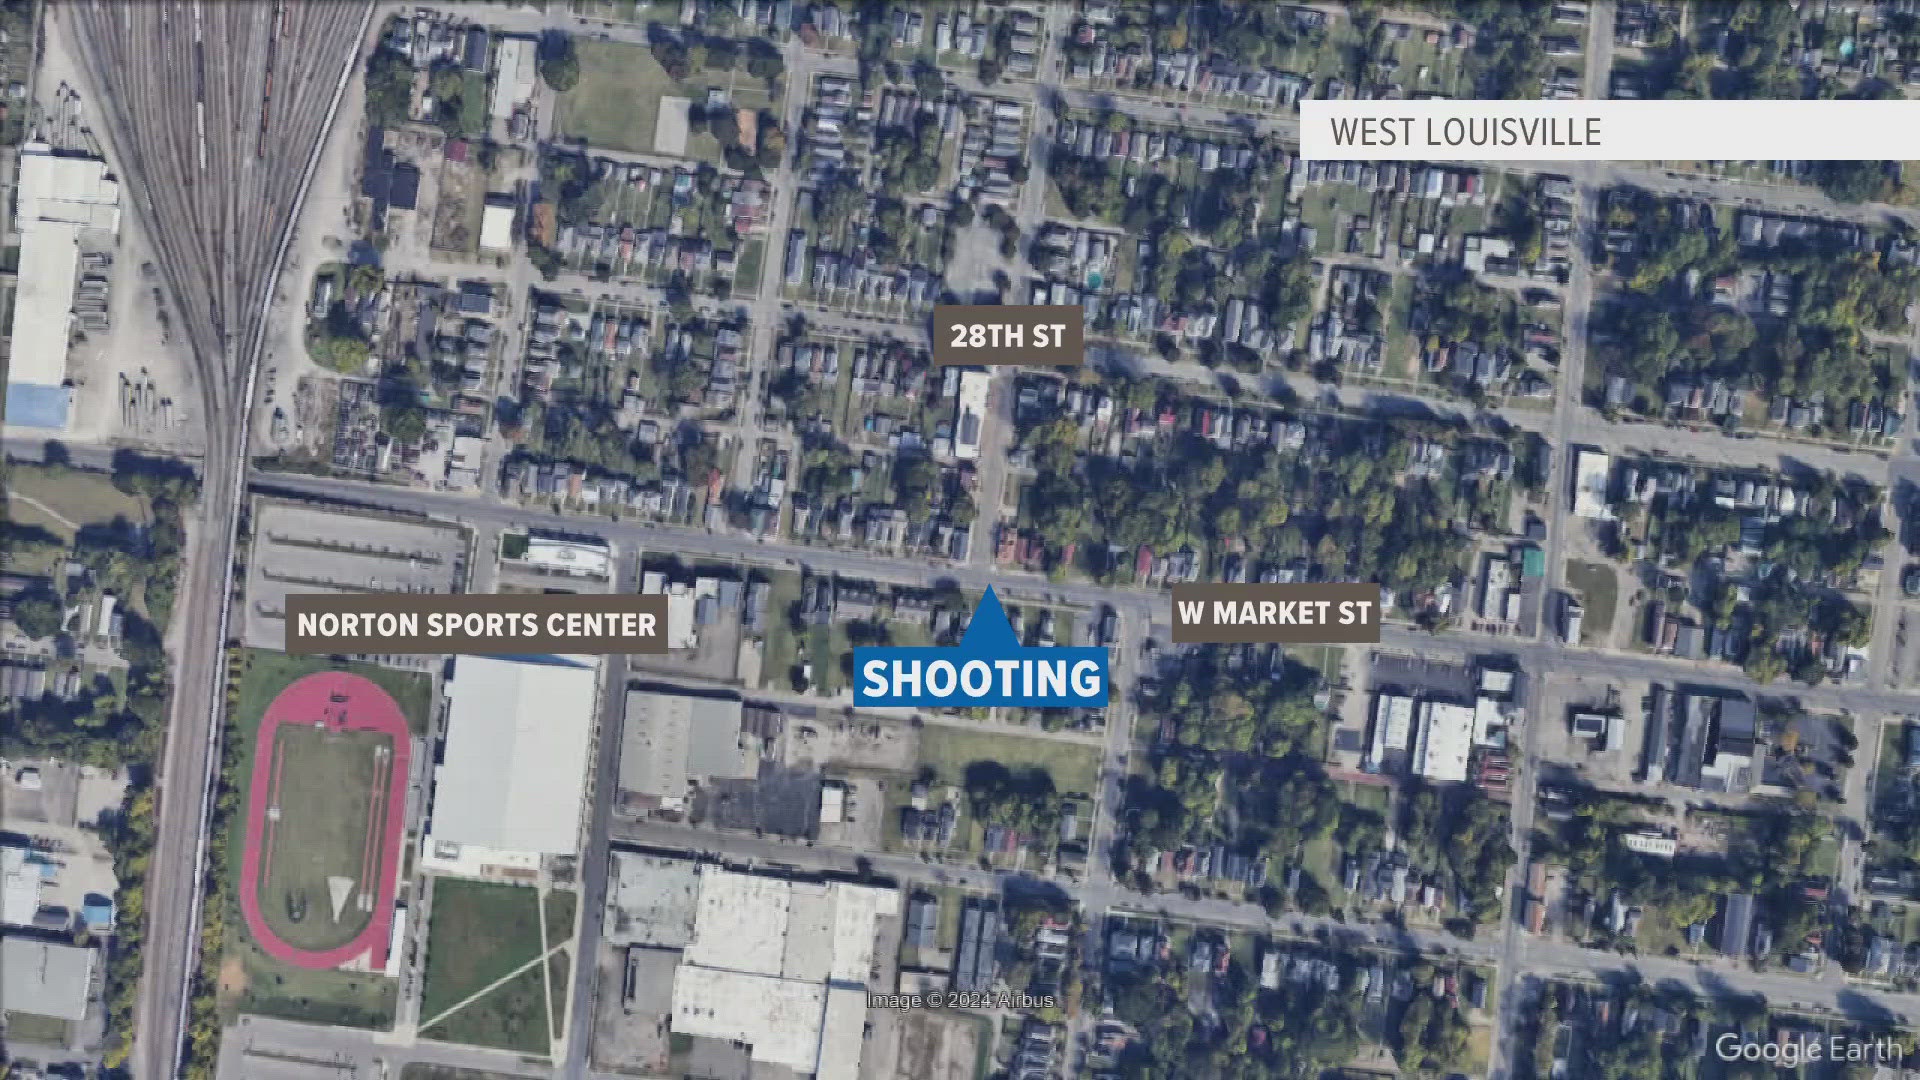 Louisville officers found a man suffering from a gunshot wound Friday morning. Shortly after, he was pronounced dead at the hospital.